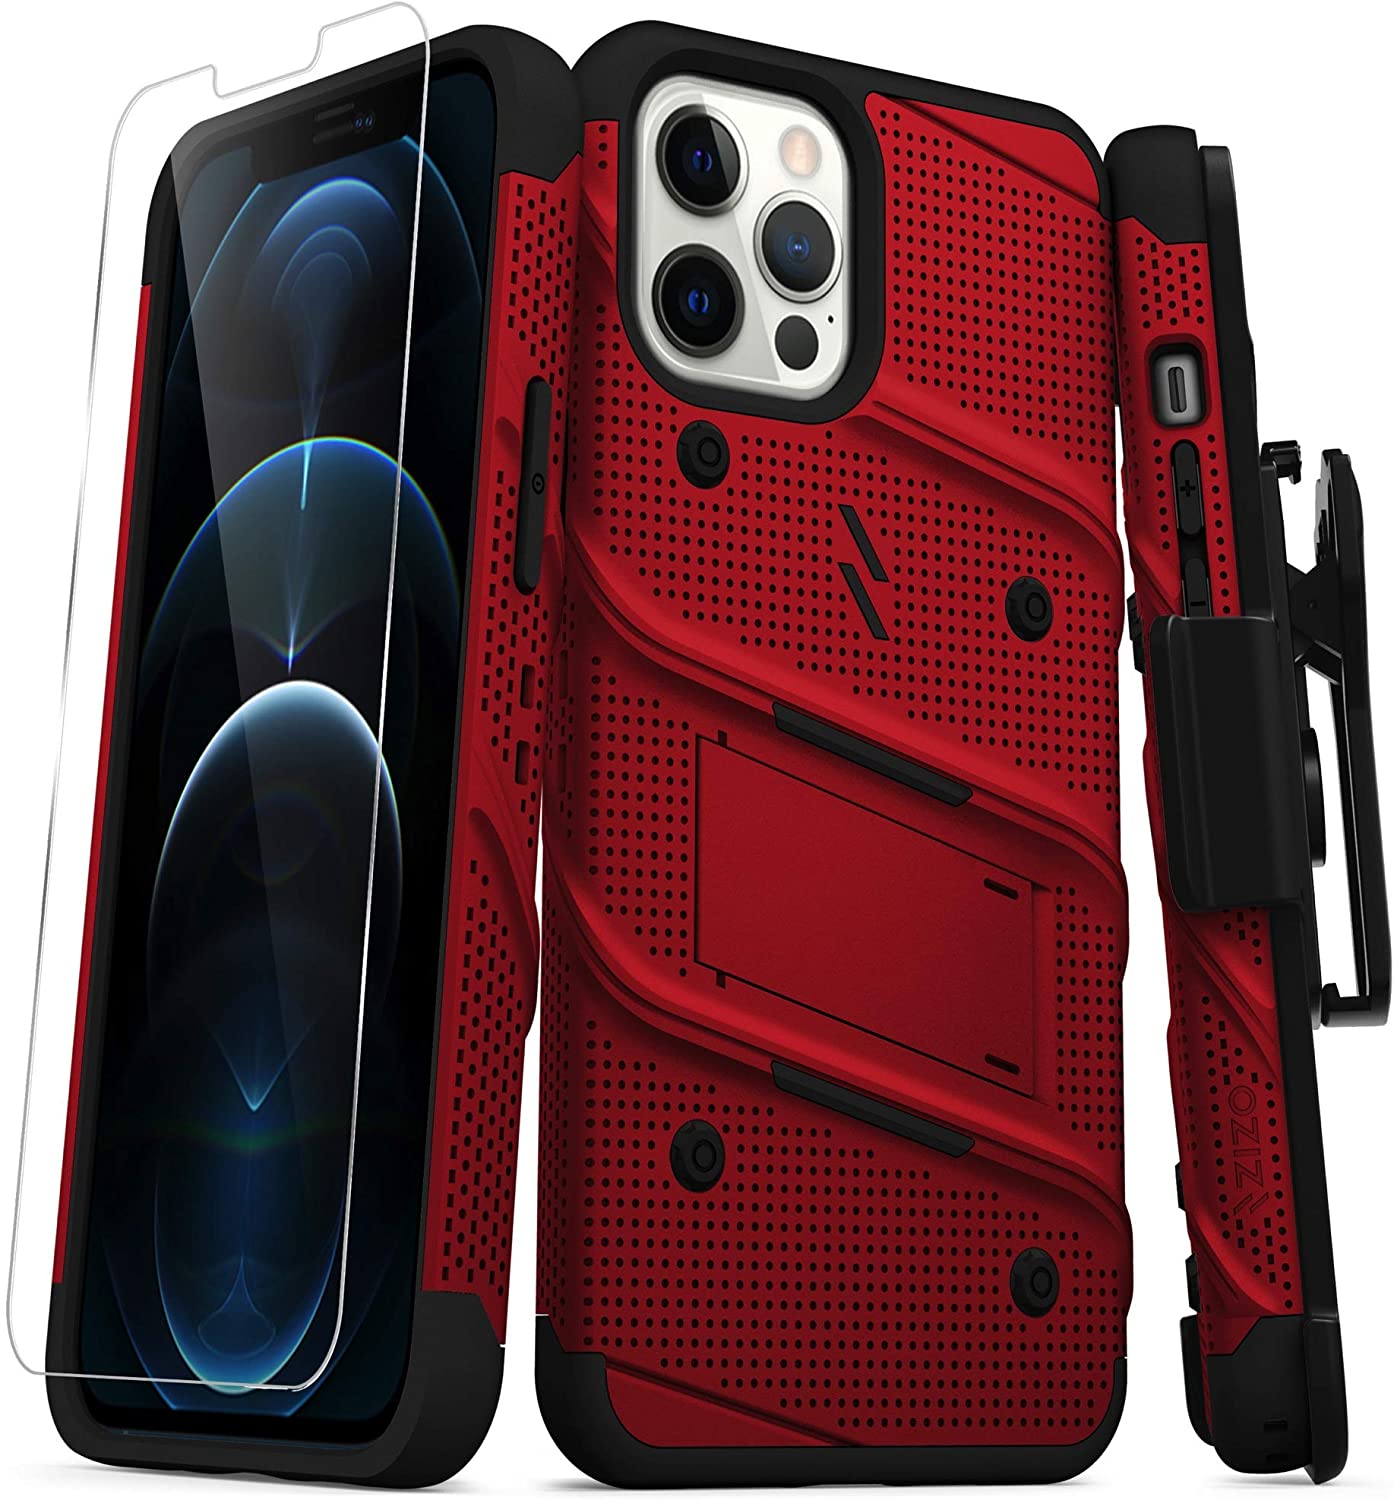 ZIZO Bolt Series for iPhone XR Case Military Grade Drop Tested with Tempered Glass Screen Protector Holster and Kickstand RED Black 